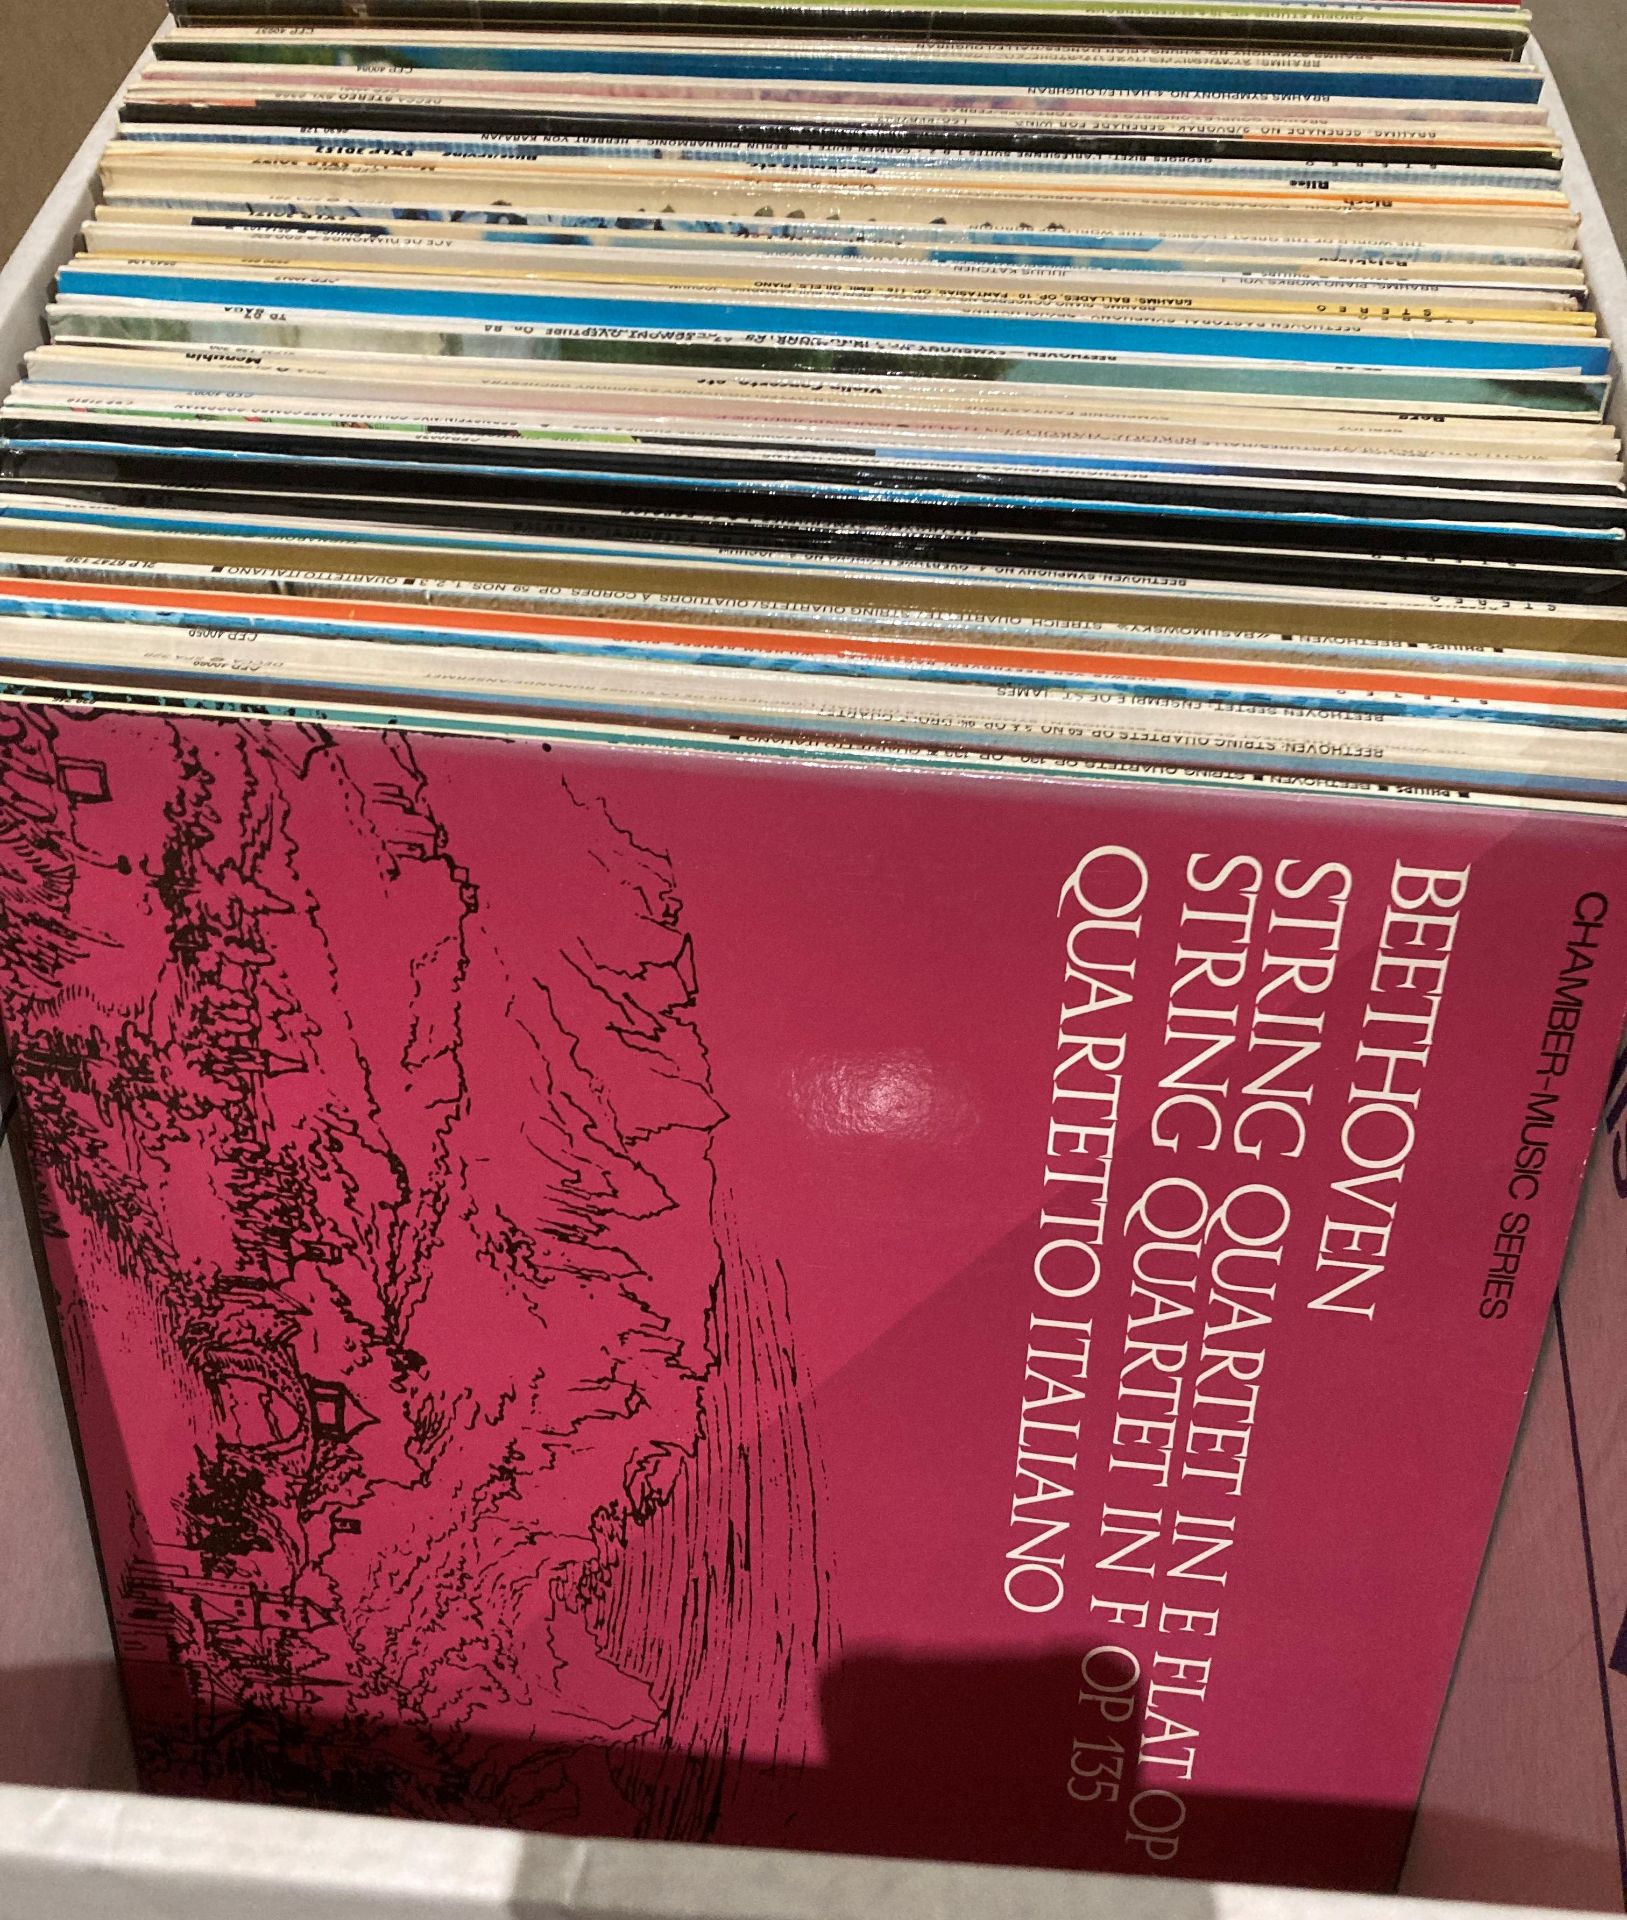 Contents to two boxes - approximately 115 assorted music LPs (mainly classical music) including - Image 2 of 5